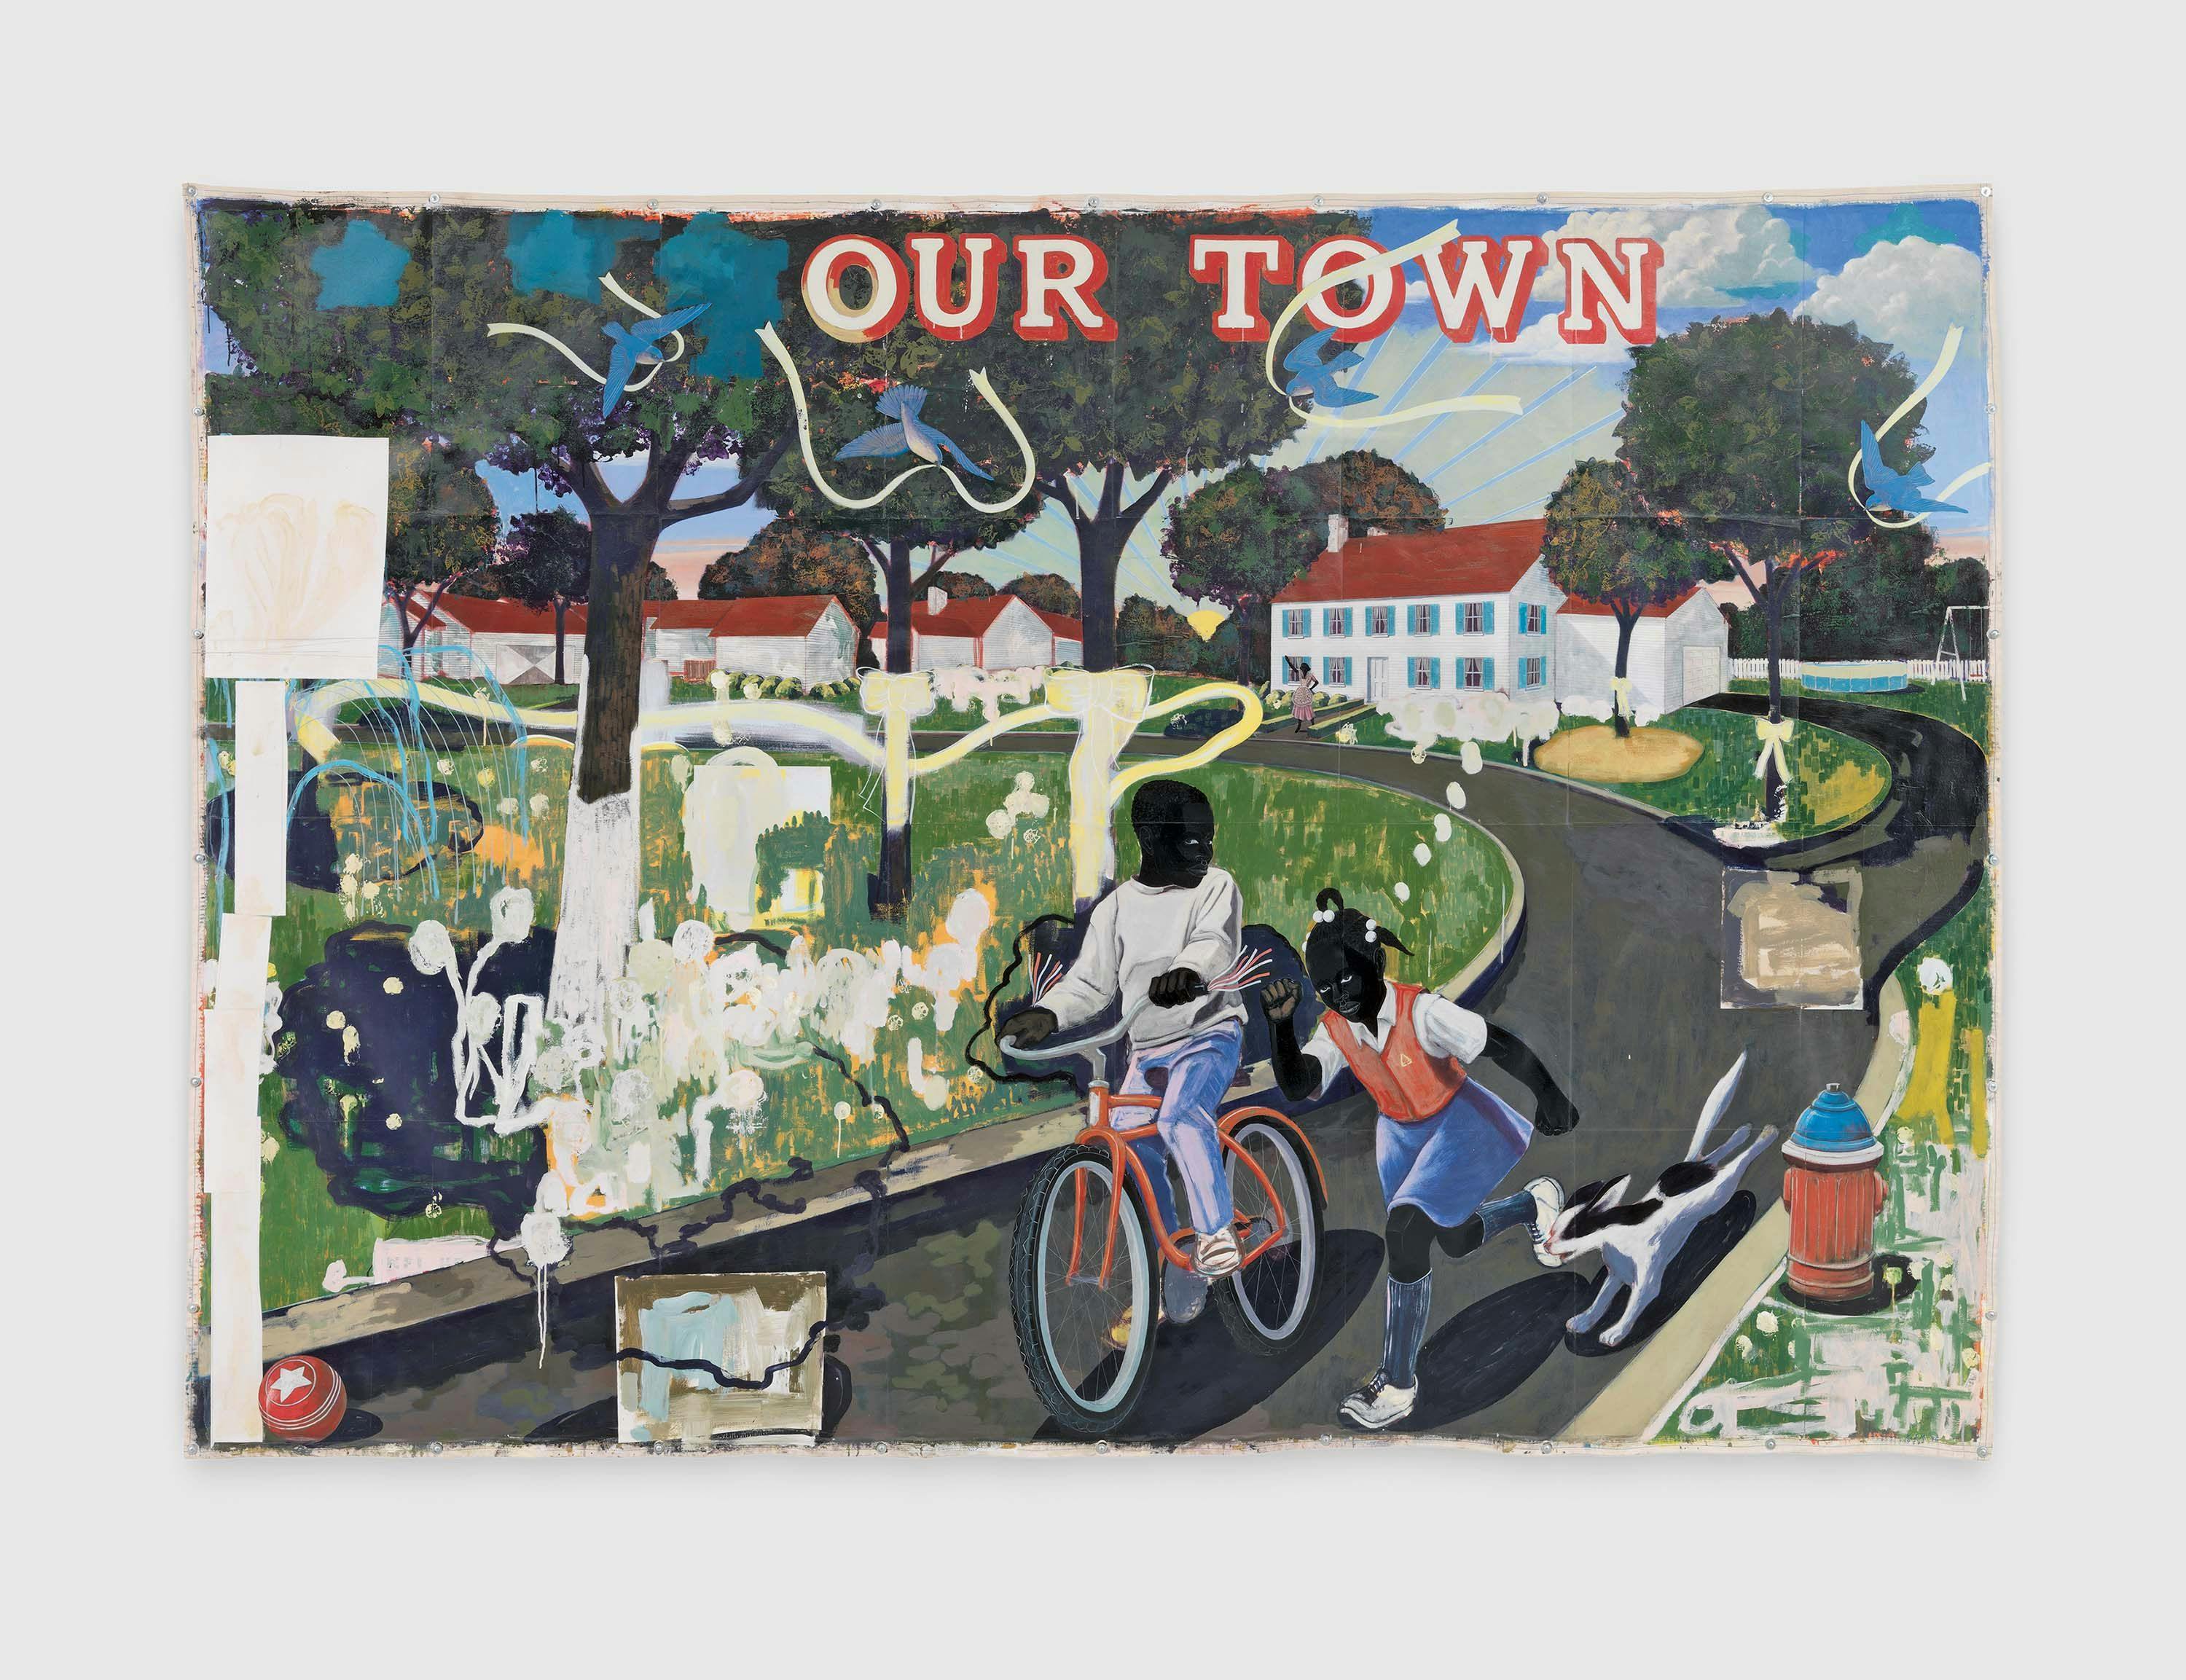 A painting by Kerry James Marshall, titled Our Town, dated 1995.